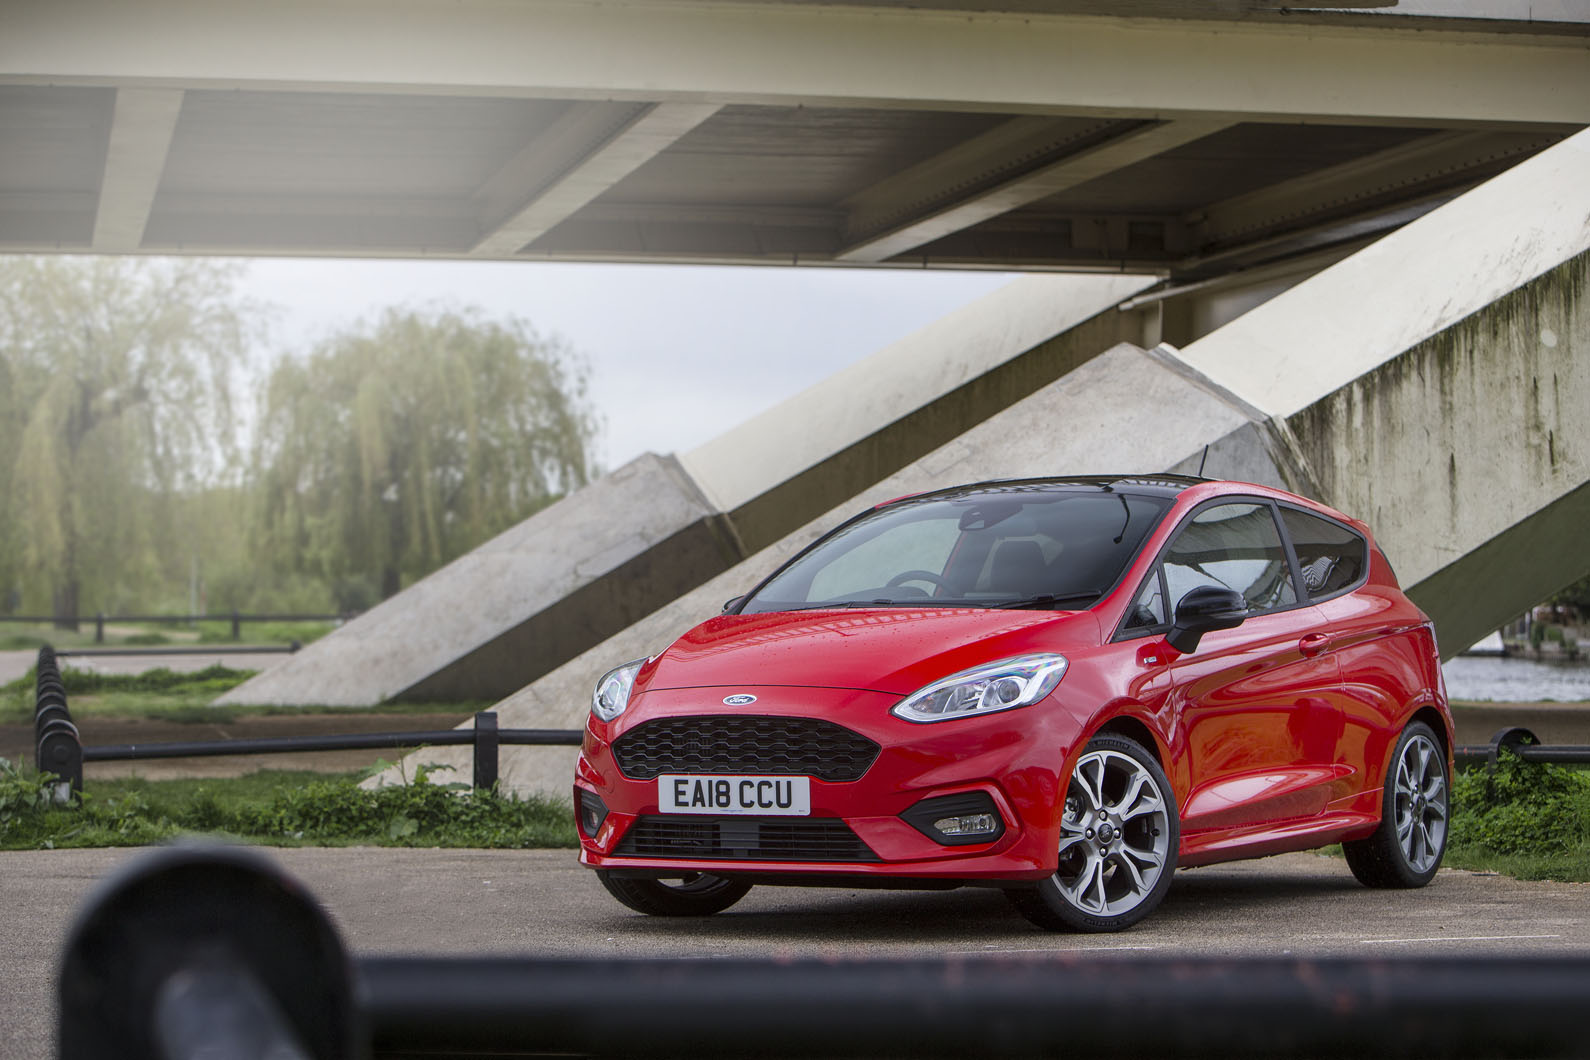 Review: 2010 Ford Fiesta Euro-Spec almost ready for U.S. arrival